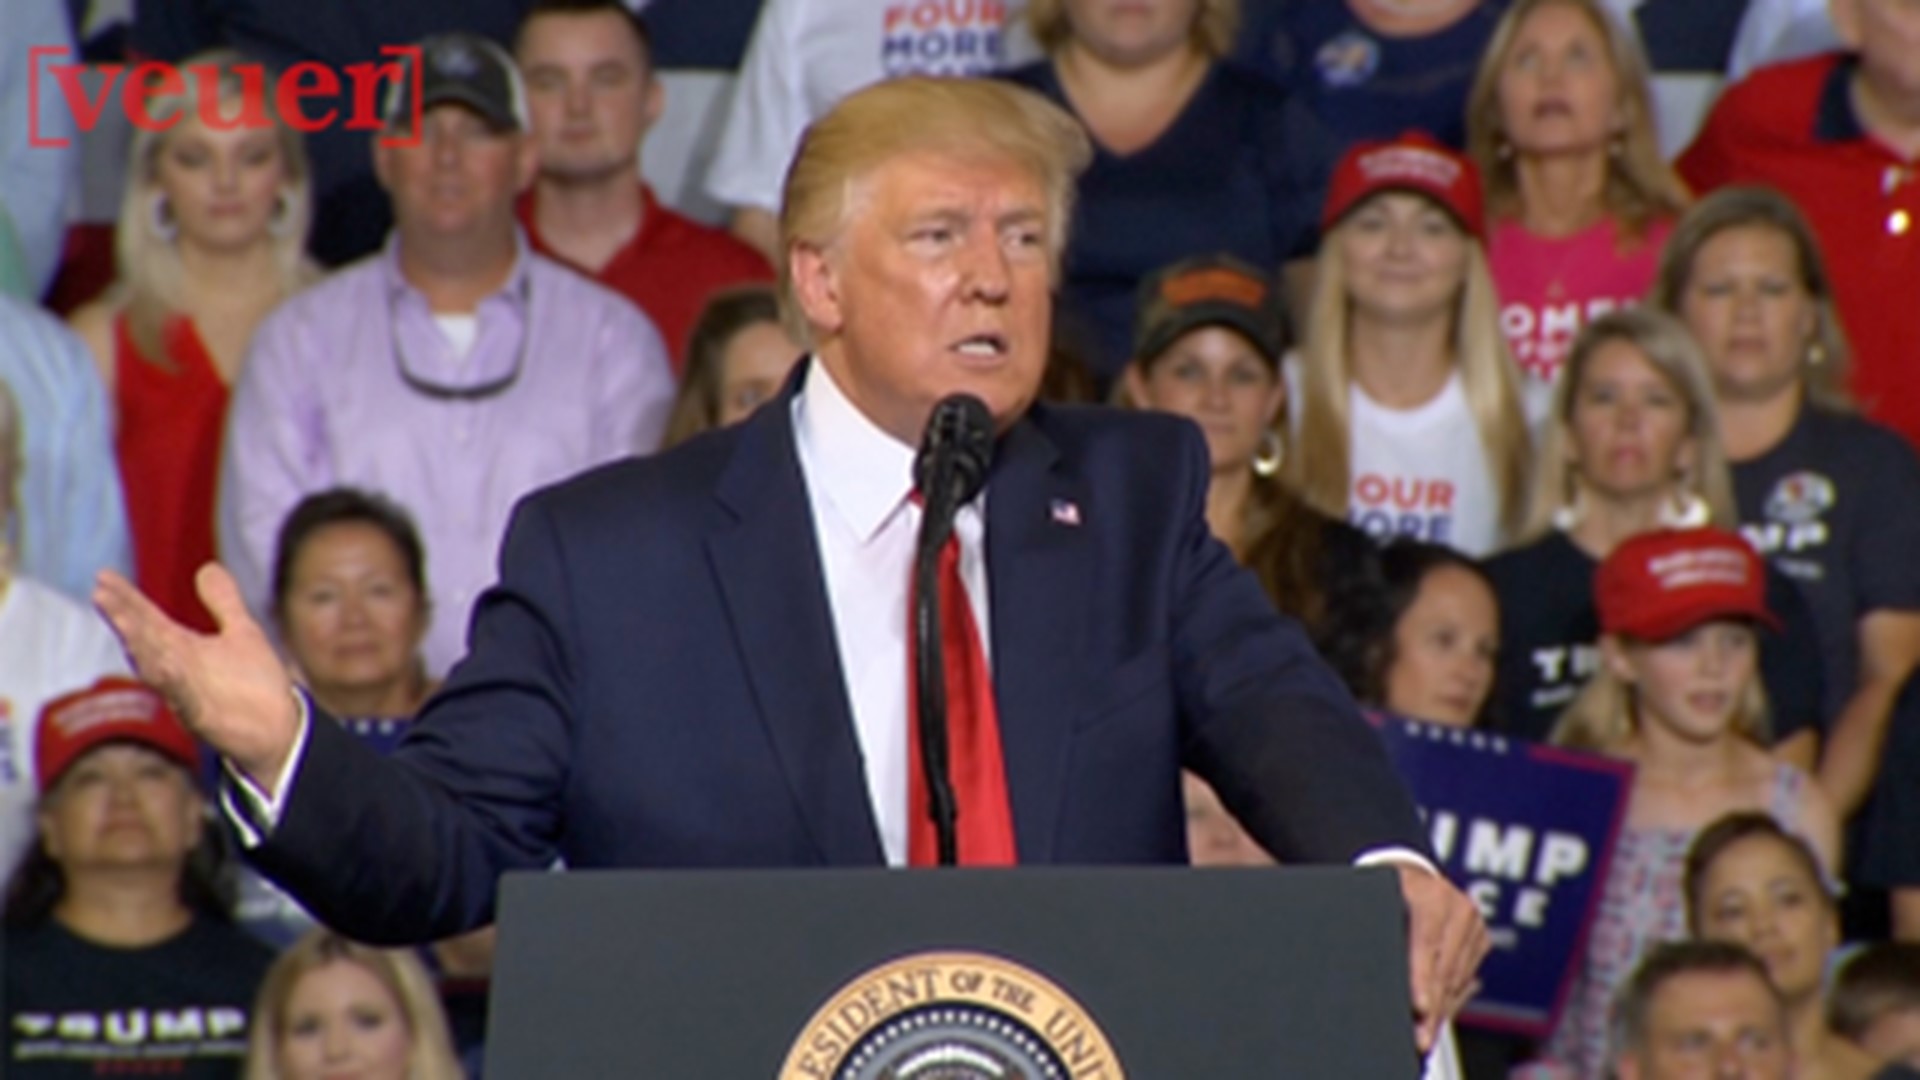 President Donald Trump's approval rating has hit an all-time high in the latest Marist poll. Veuer's Chandra Lanier has the story.